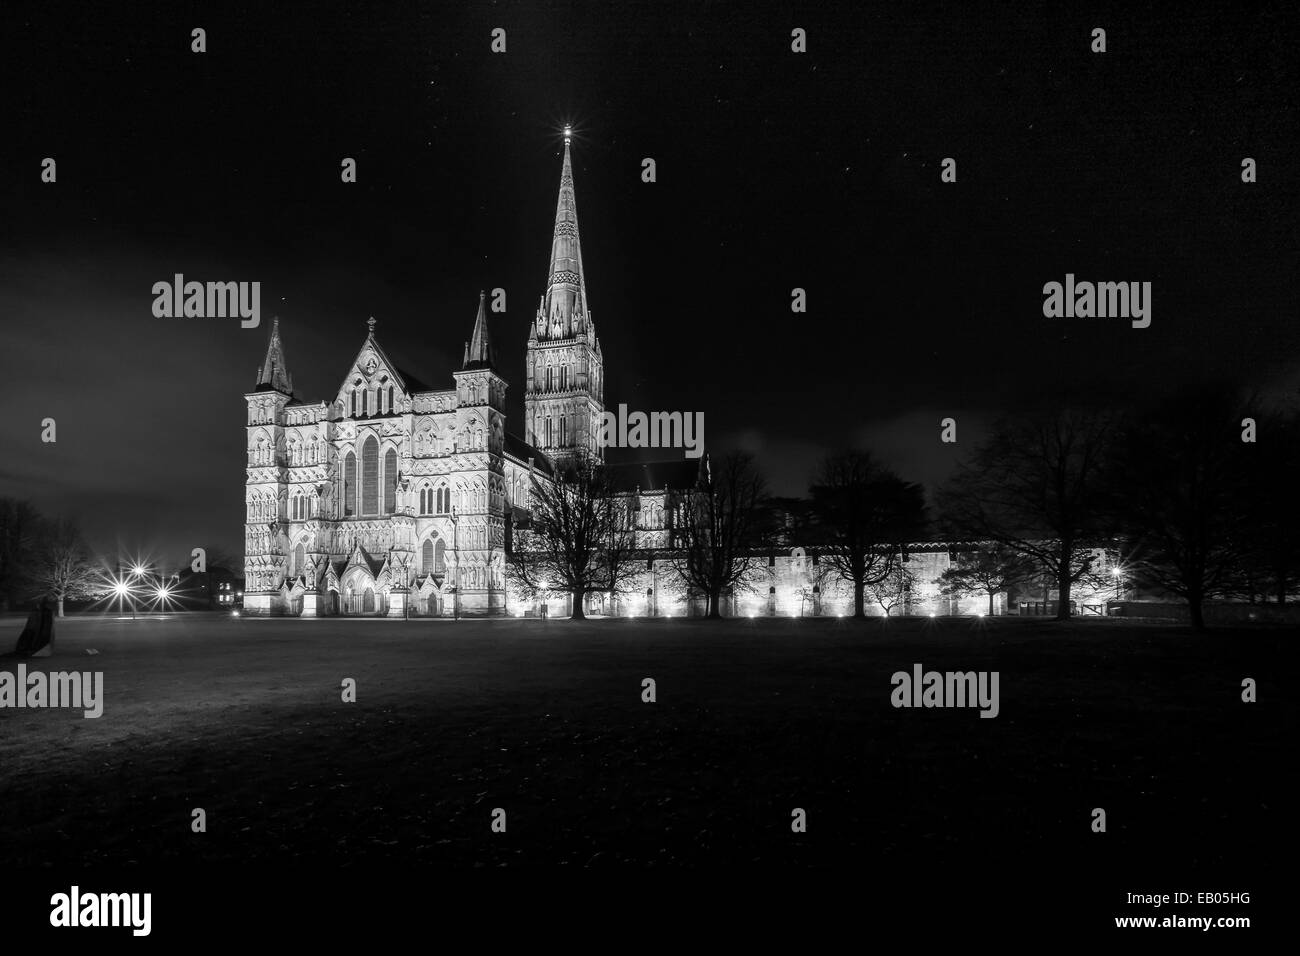 Salisbury cathedral floodlit on a starry night Stock Photo